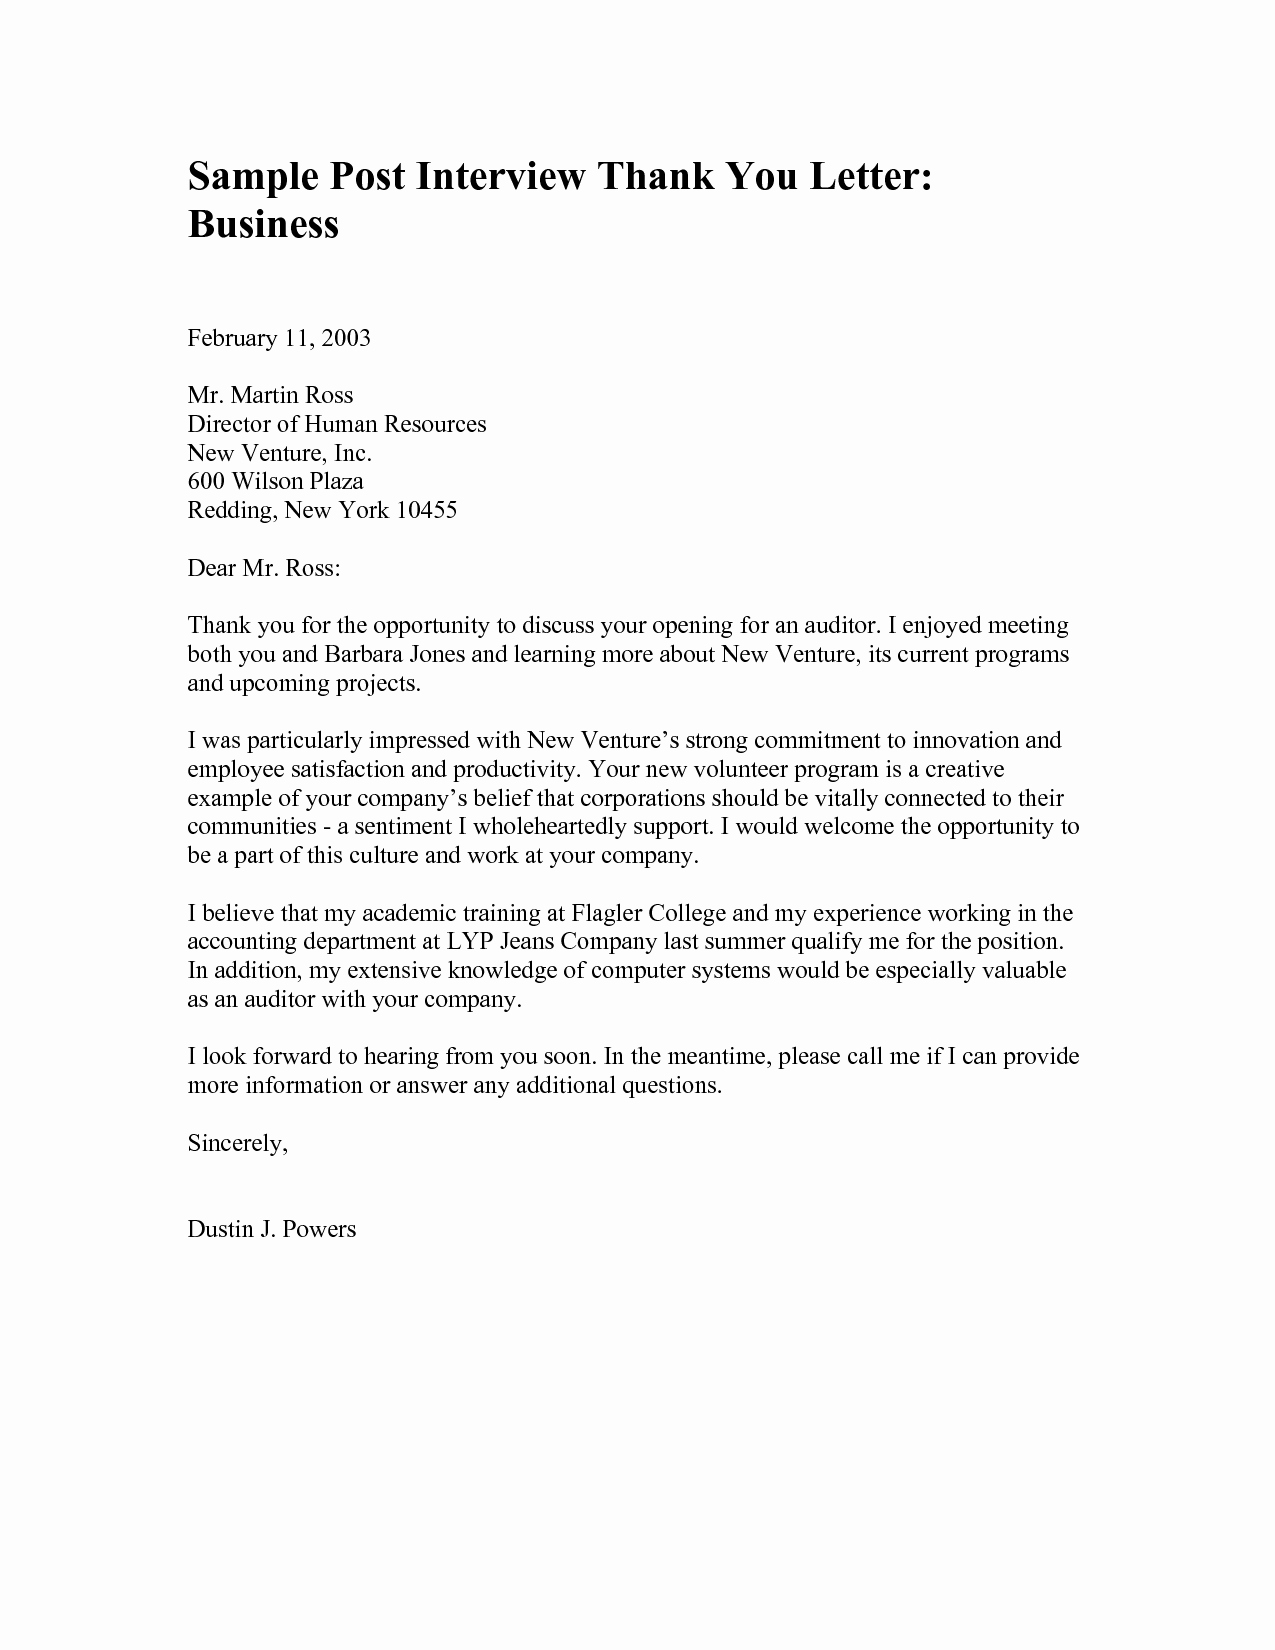 Business Thank You Note Template New Business Thank You Letter format